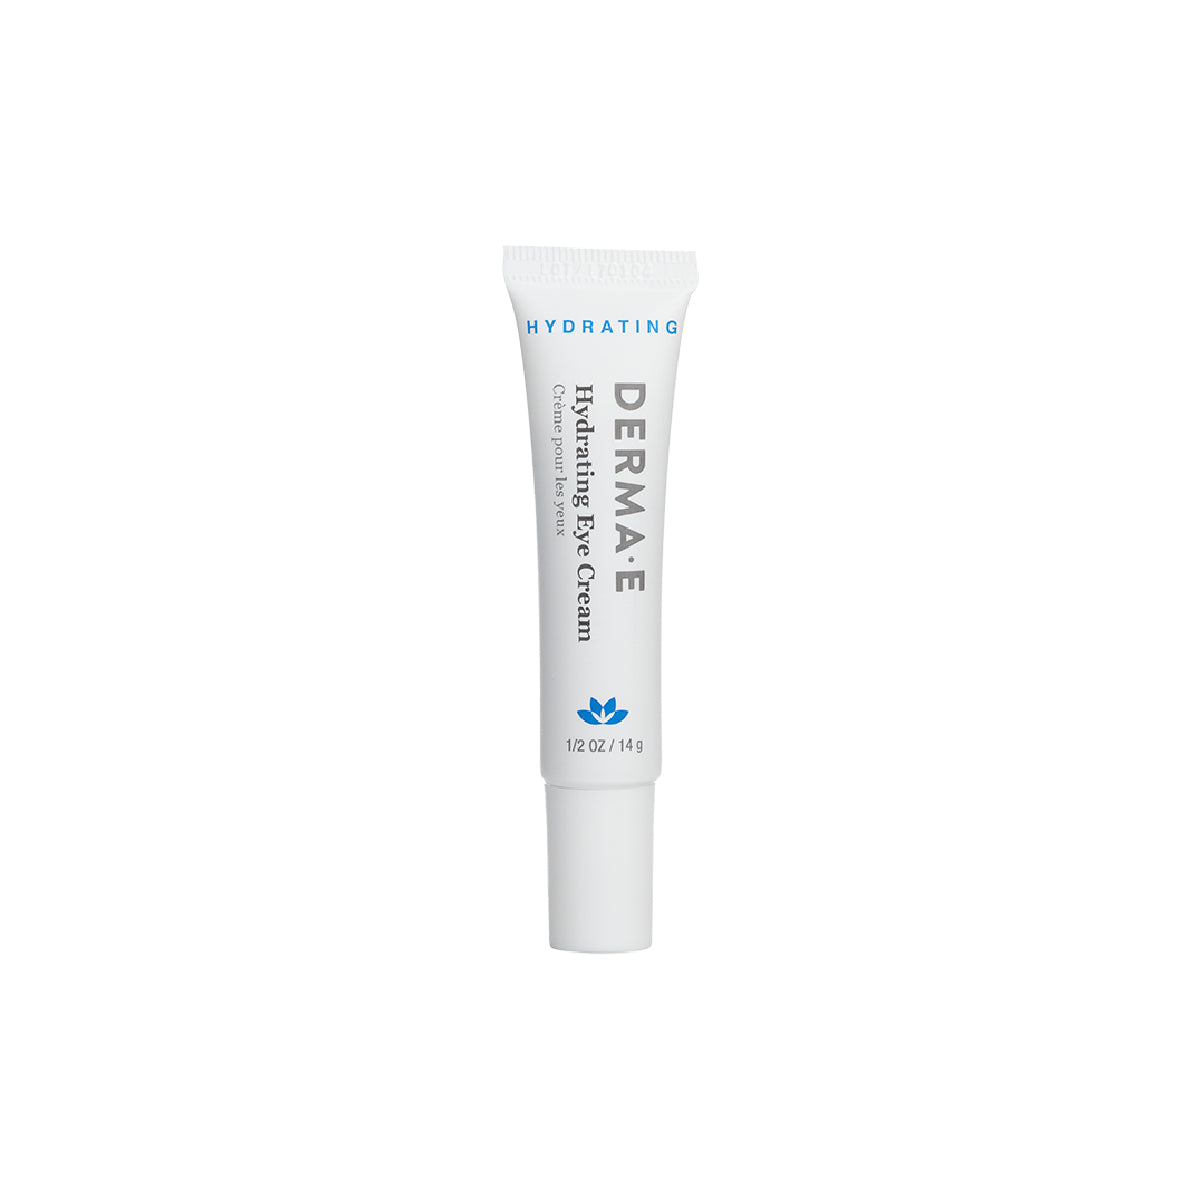 Hydrating Eye Cream bottle - clinically proven to improve skin hydration by 100% in four weeks.